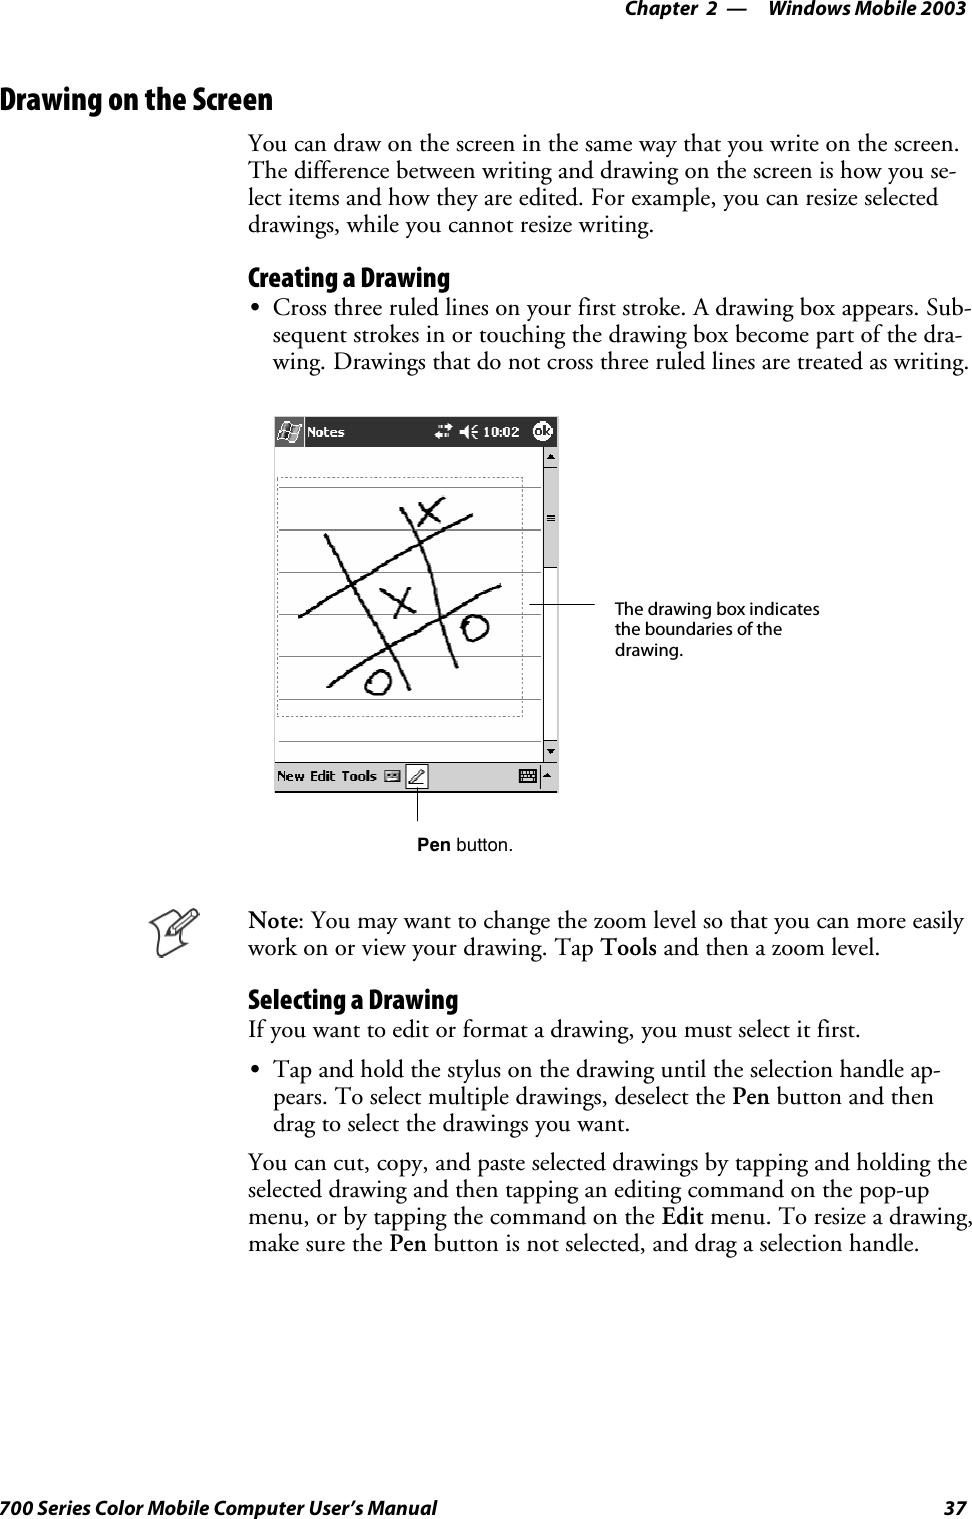 Windows Mobile 2003—Chapter 237700 Series Color Mobile Computer User’s ManualDrawing on the ScreenYou can draw on the screen in the same way that you write on the screen.The difference between writing and drawing on the screen is how you se-lect items and how they are edited. For example, you can resize selecteddrawings, while you cannot resize writing.Creating a DrawingSCross three ruled lines on your first stroke. A drawing box appears. Sub-sequent strokes in or touching the drawing box become part of the dra-wing. Drawings that do not cross three ruled lines are treated as writing.The drawing box indicatesthe boundaries of thedrawing.Pen button.Note: You may want to change the zoom level so that you can more easilywork on or view your drawing. Tap Tools and then a zoom level.Selecting a DrawingIfyouwanttoeditorformatadrawing,youmustselectitfirst.STap and hold the stylus on the drawing until the selection handle ap-pears. To select multiple drawings, deselect the Pen button and thendrag to select the drawings you want.You can cut, copy, and paste selected drawings by tapping and holding theselected drawing and then tapping an editing command on the pop-upmenu, or by tapping the command on the Edit menu. To resize a drawing,make sure the Pen button is not selected, and drag a selection handle.